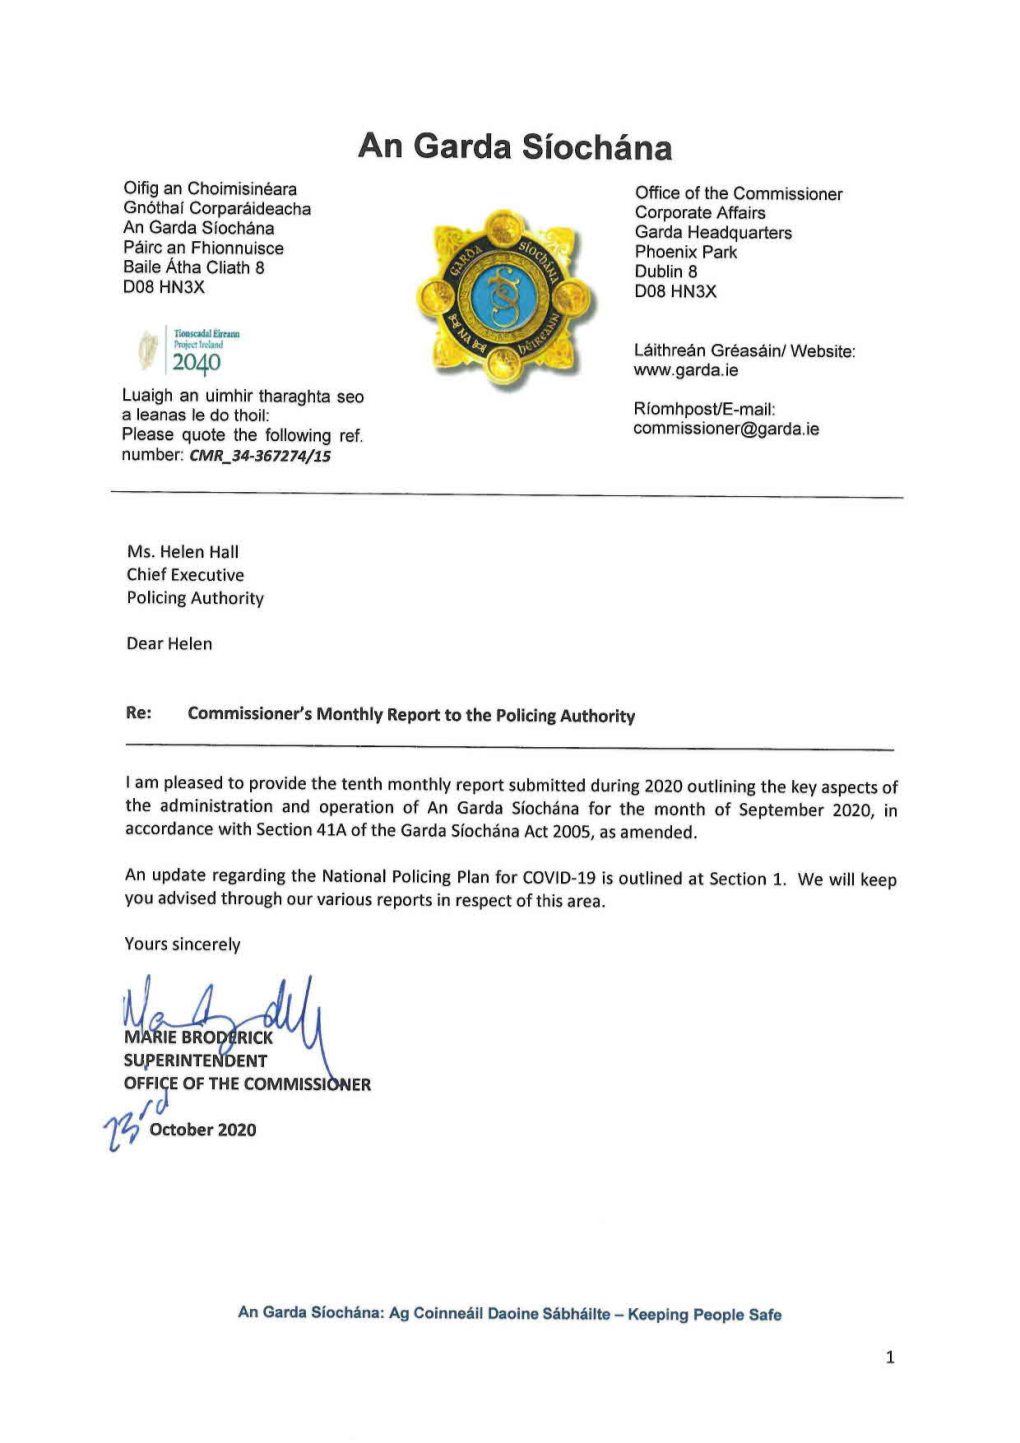 Garda Commissioner's Monthly Report to The